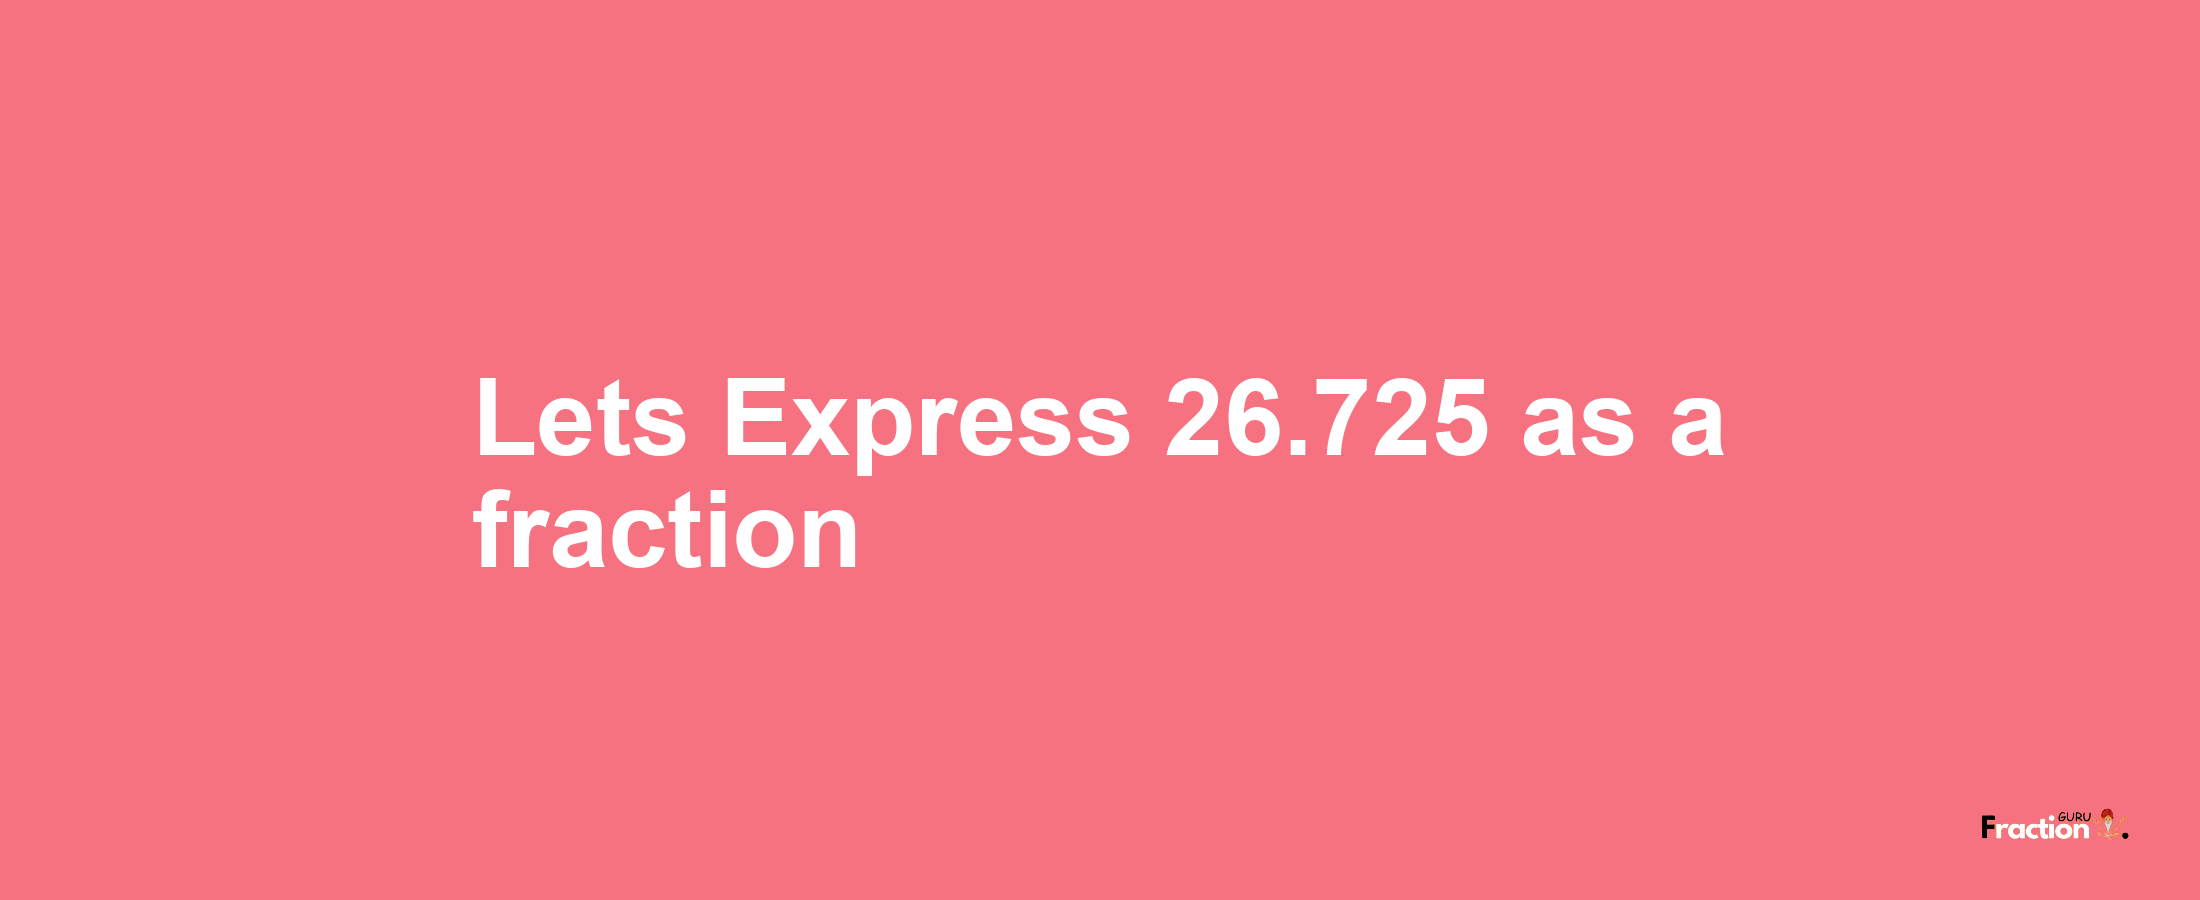 Lets Express 26.725 as afraction